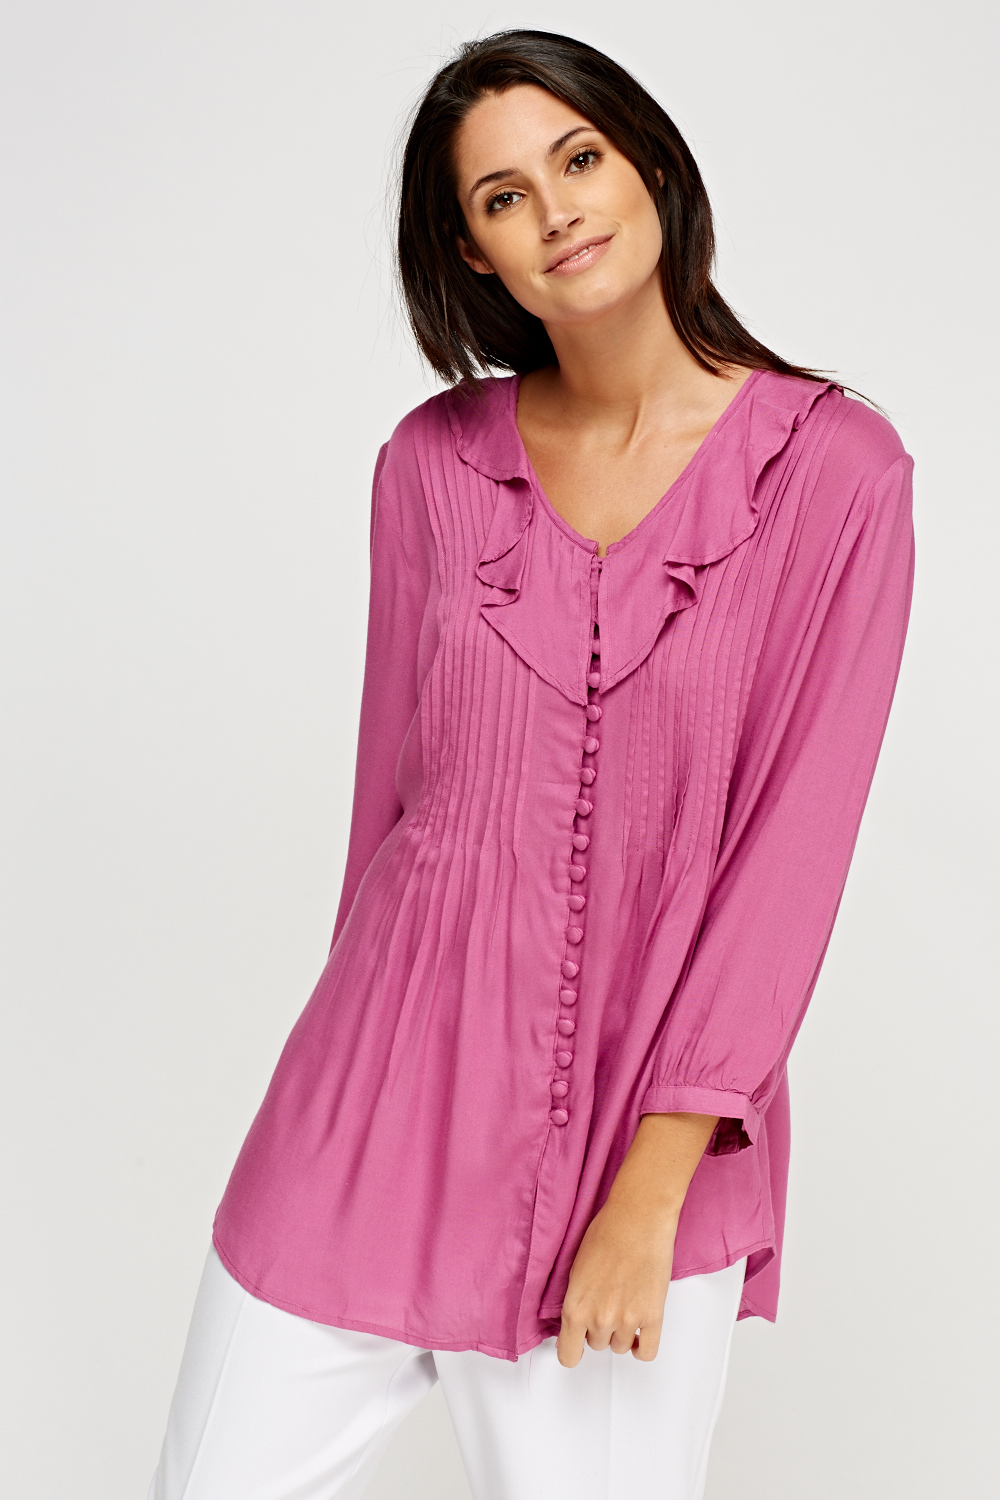 Pleated Front Purple Blouse - Just $7